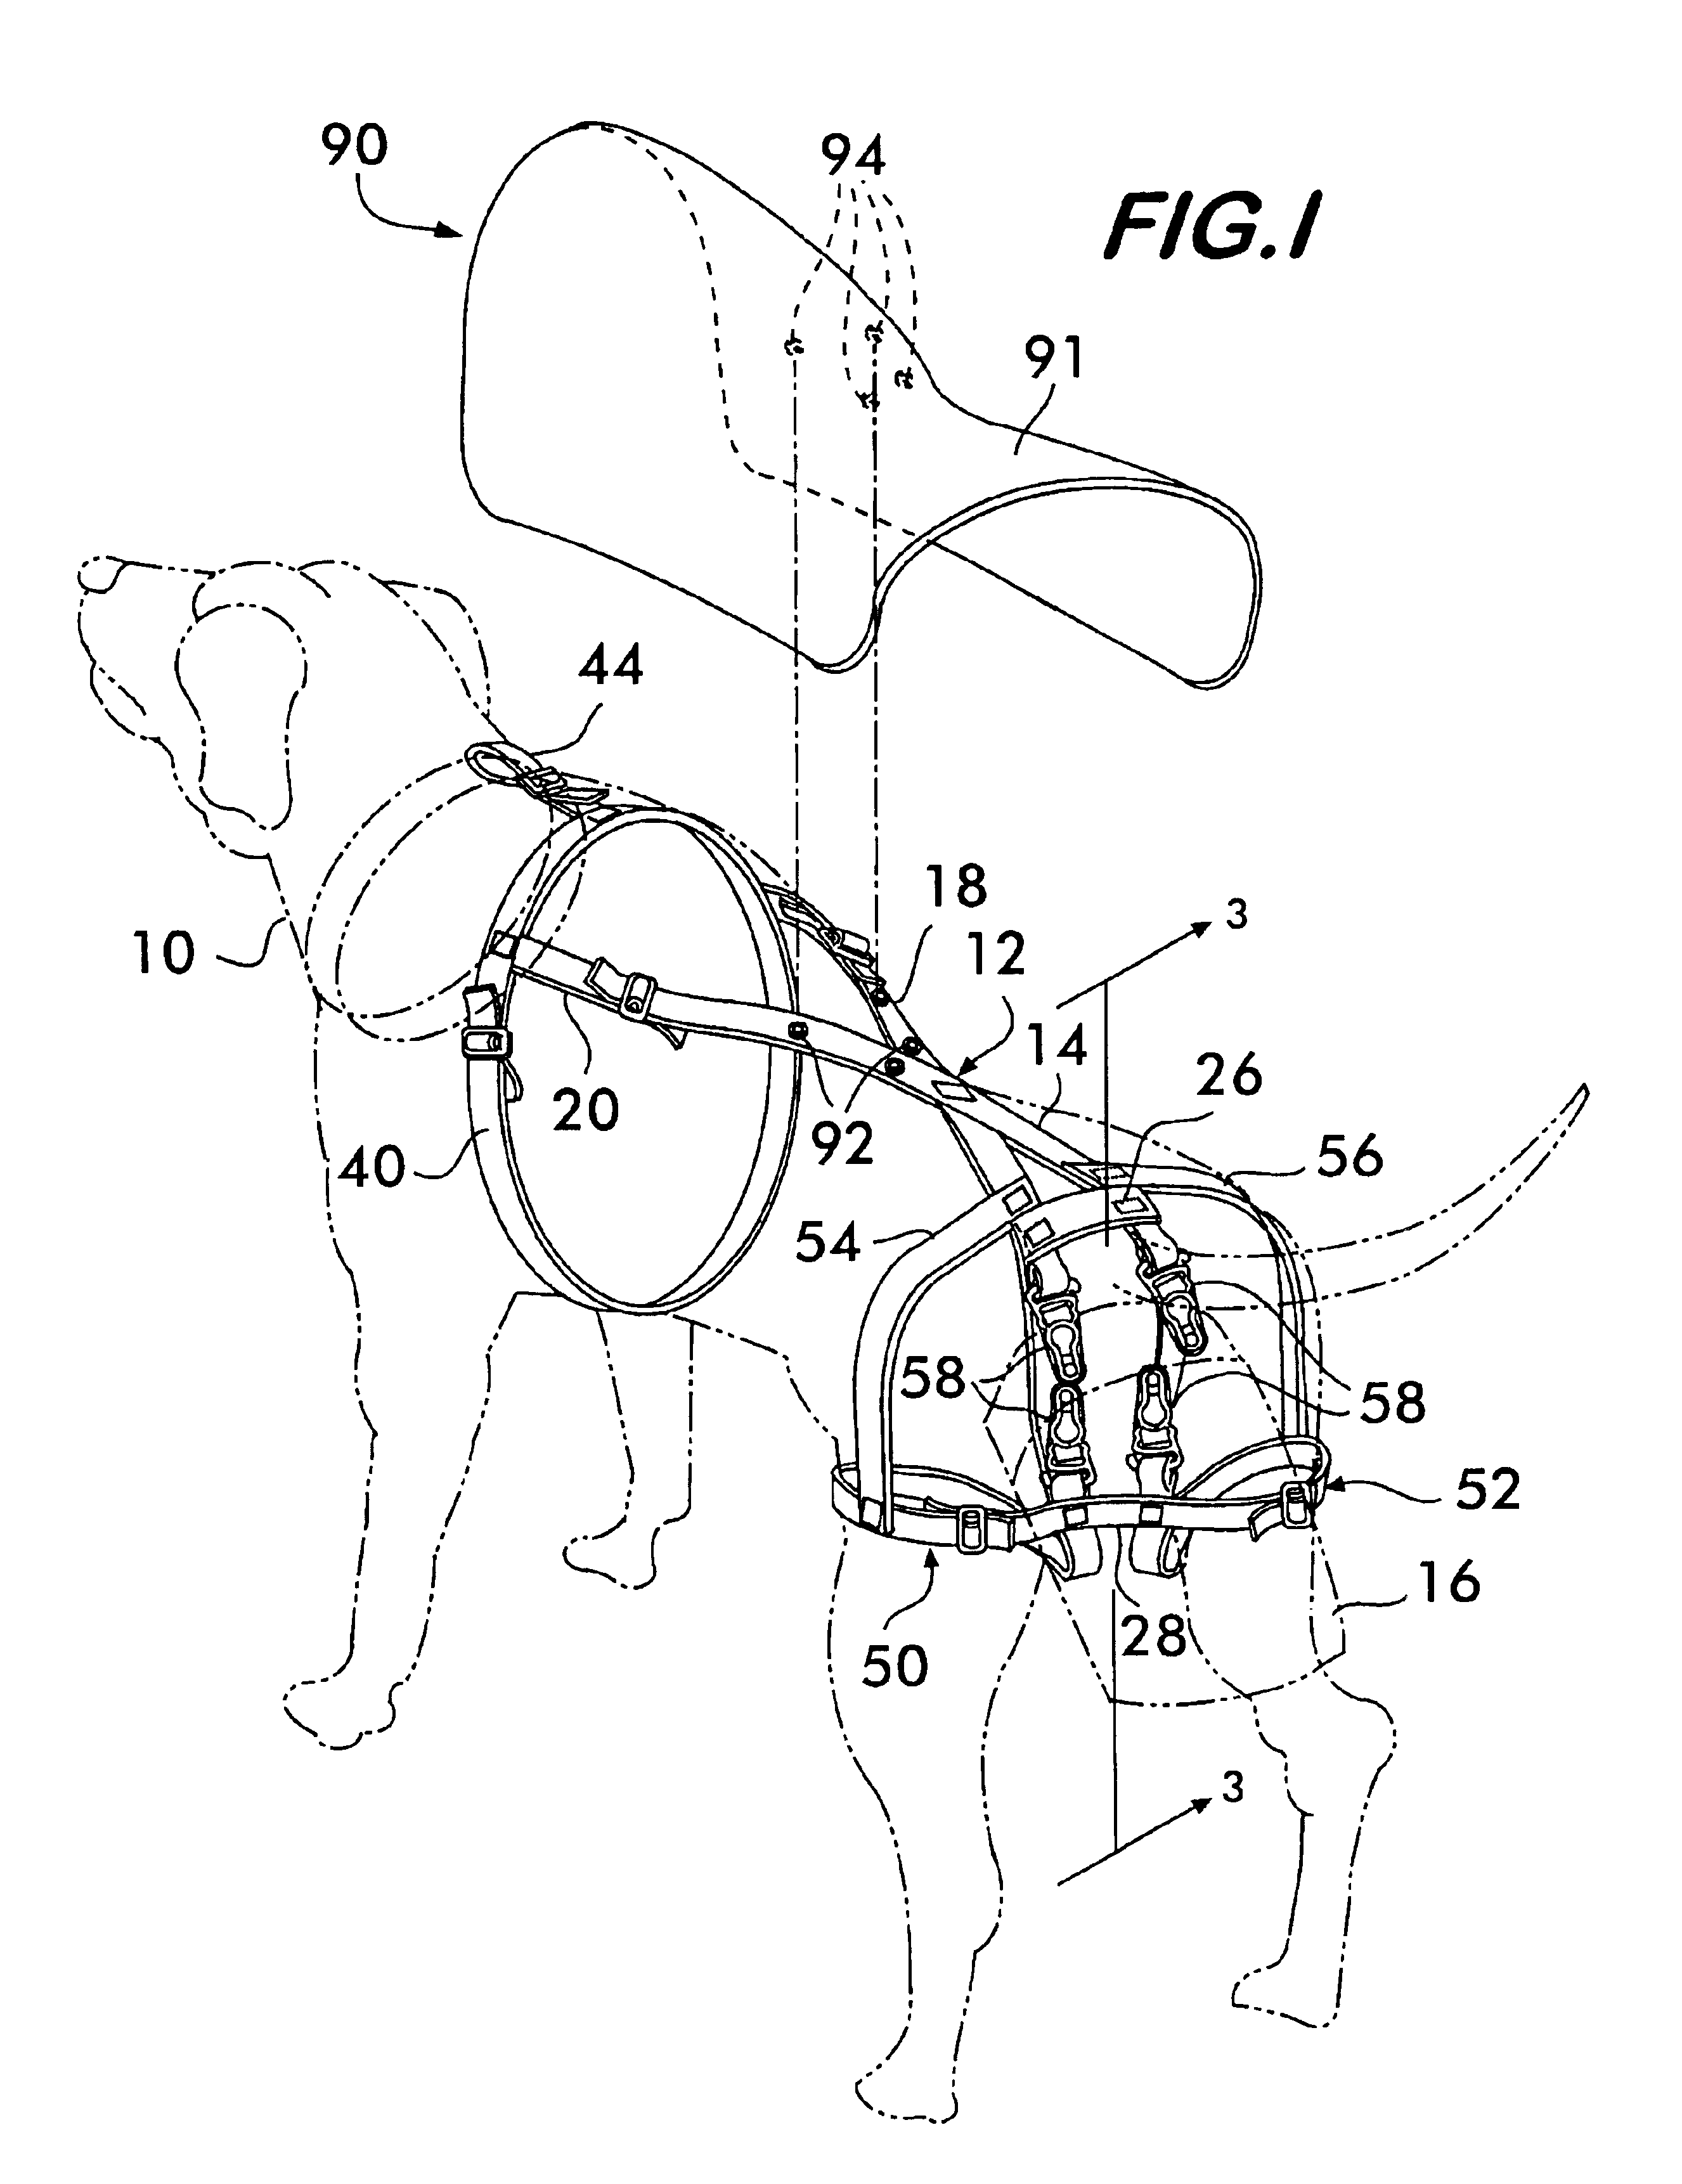 Device for collection of animal waste